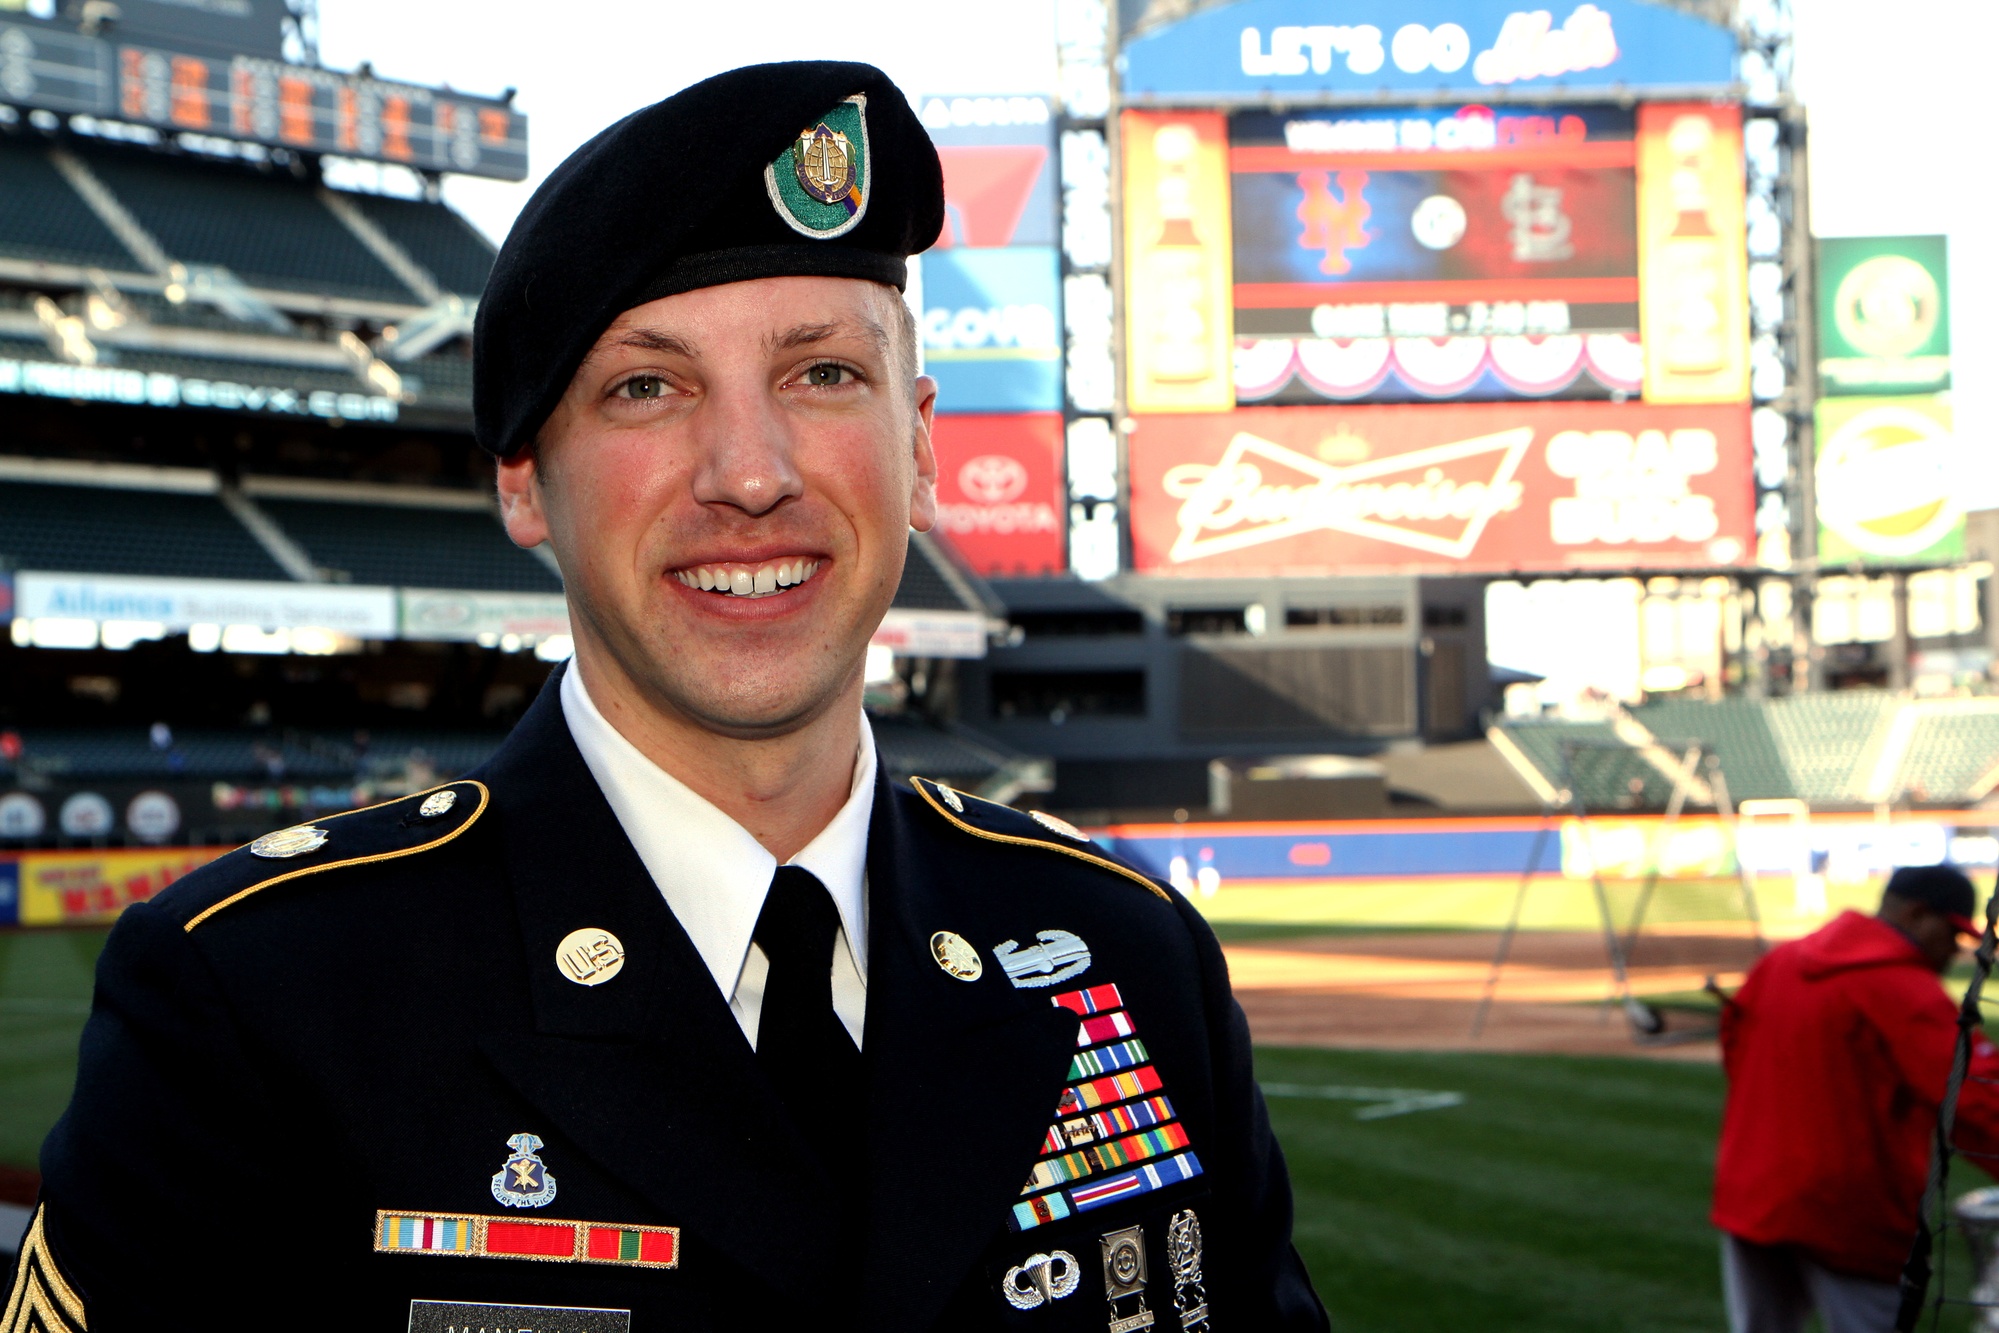 DVIDS - Images - Mets Military Appreciation [Image 1 of 21]